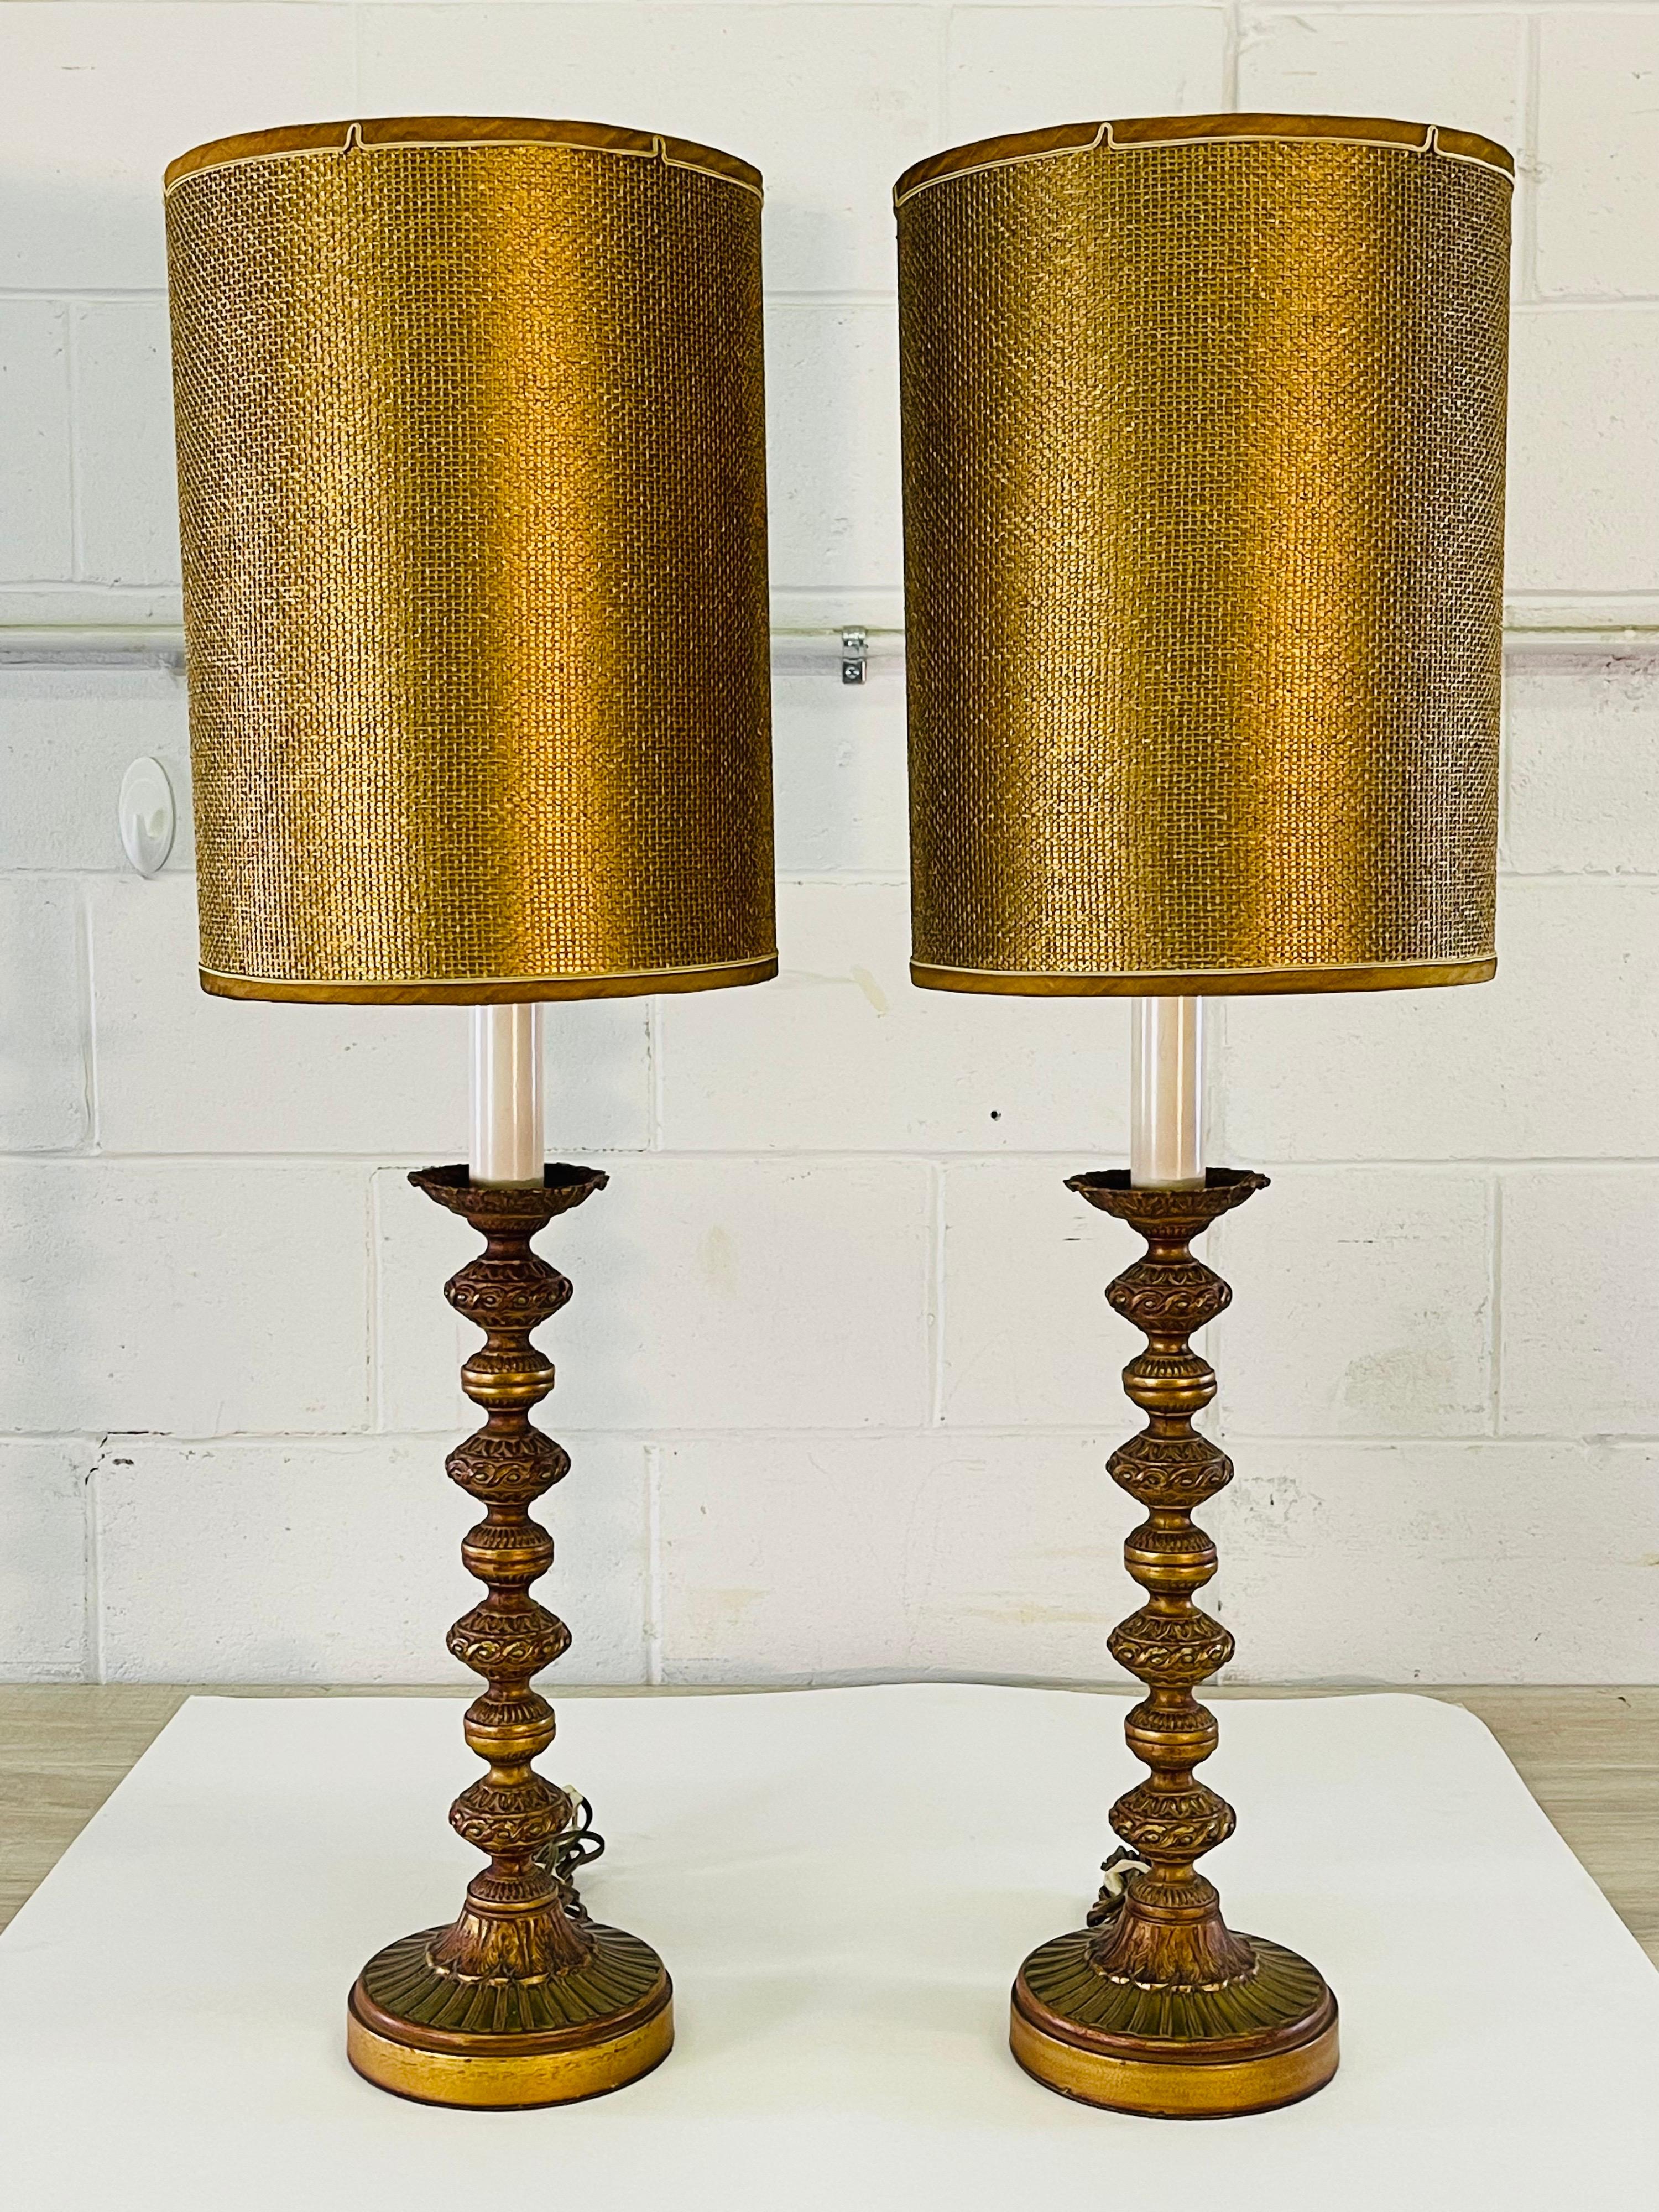 Vintage 1960s pair of green and gold metal tall table lamps with the matching original shades. The lamps are wired for the US and in working condition. These lamps can use a 3-way bulb. Socket, 24.5”H. Harp, 6.25” diameter x 12” height. The lamps